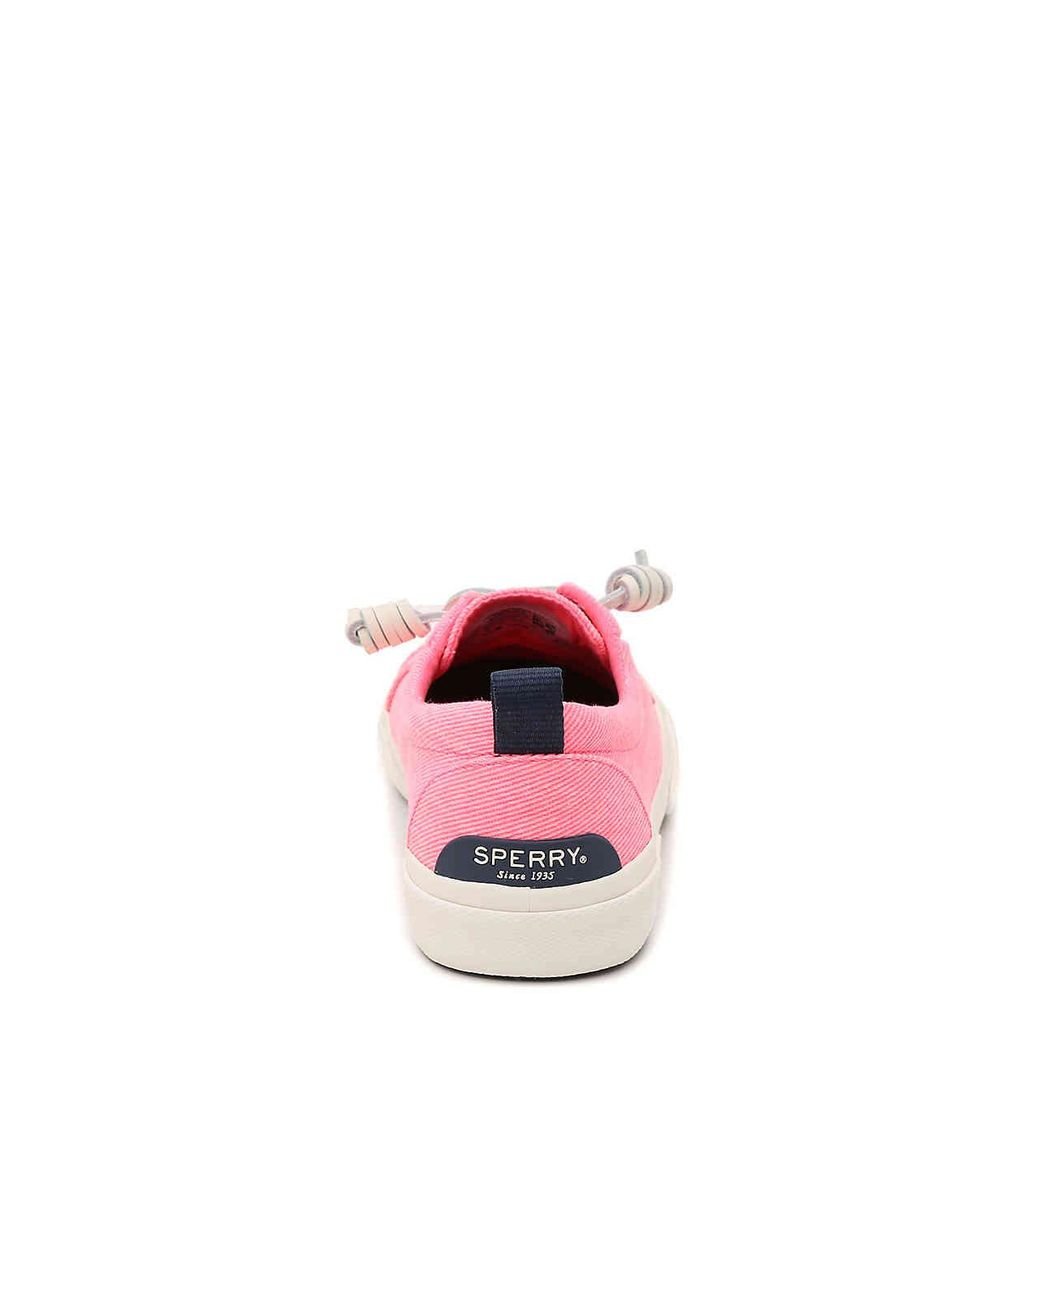 sperry pink slip on Cheaper Than Retail 